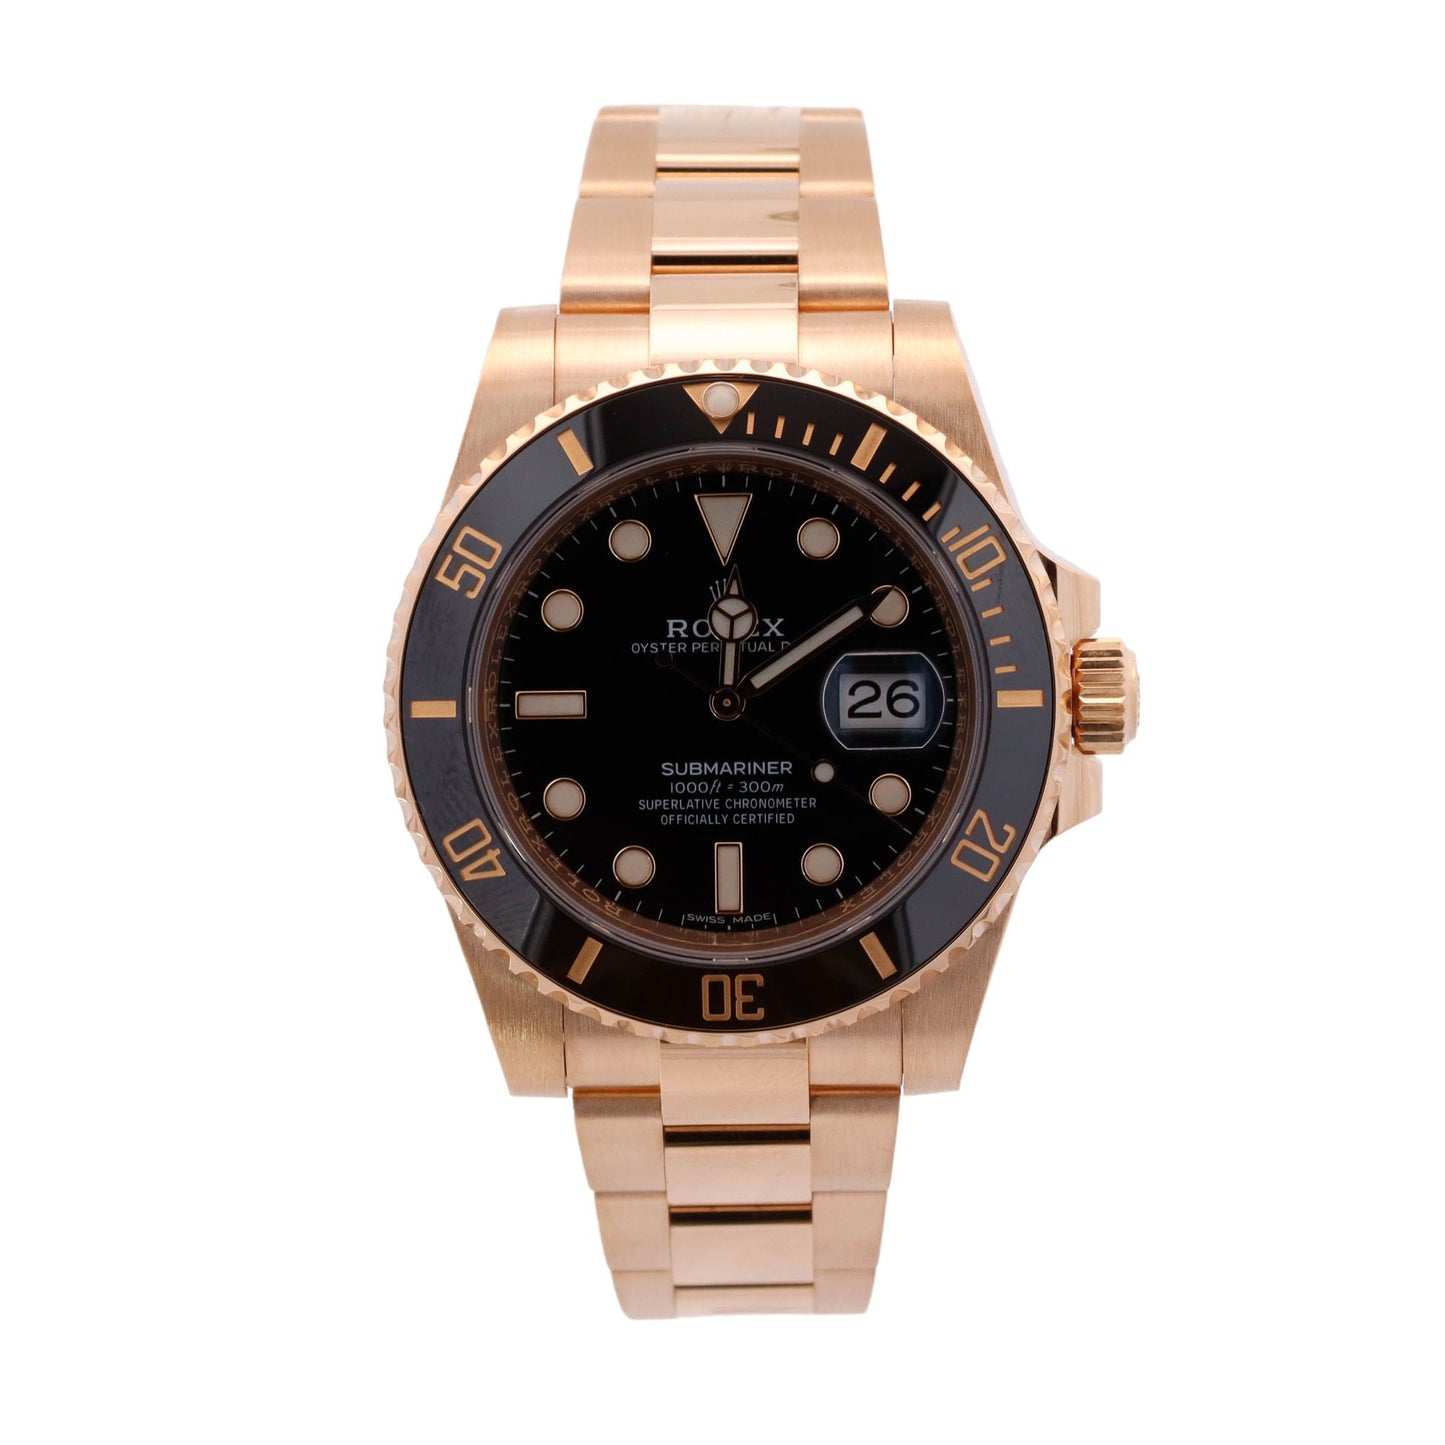 Rolex Submariner Yellow Gold 40mm Black Dot Dial Watch Reference #: 116618LN - Happy Jewelers Fine Jewelry Lifetime Warranty